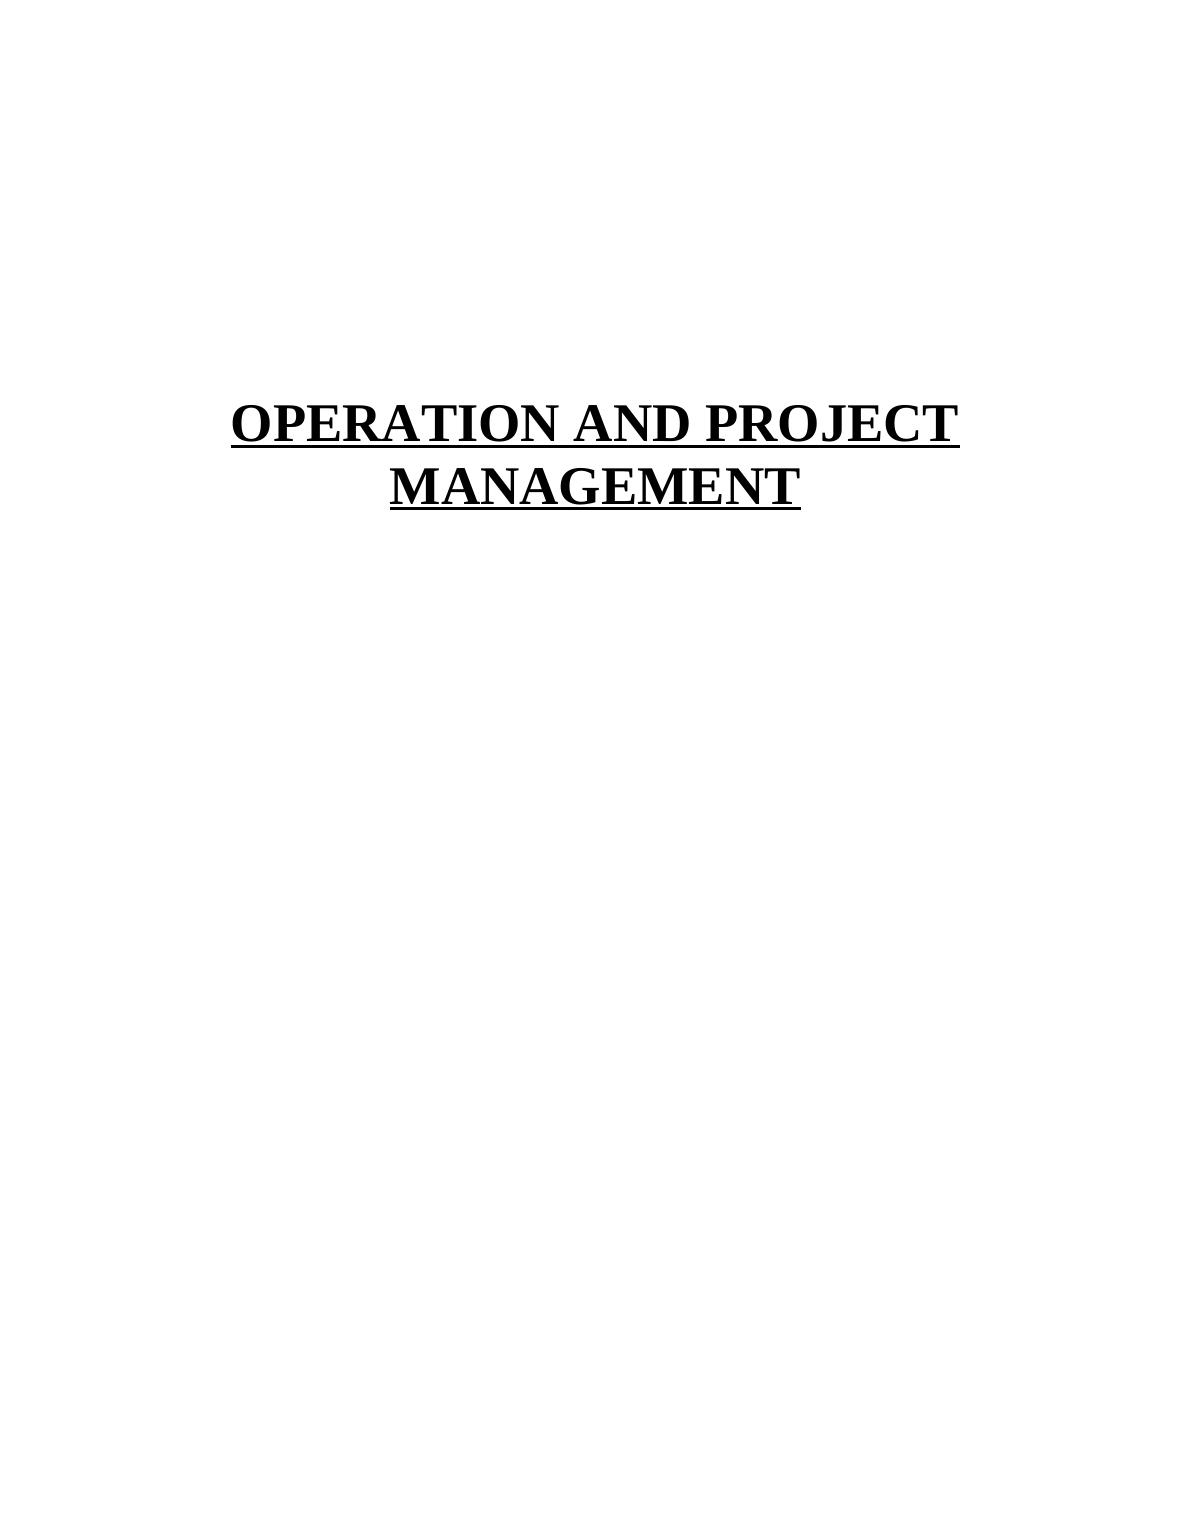 Operation and Project Management -PDF_1